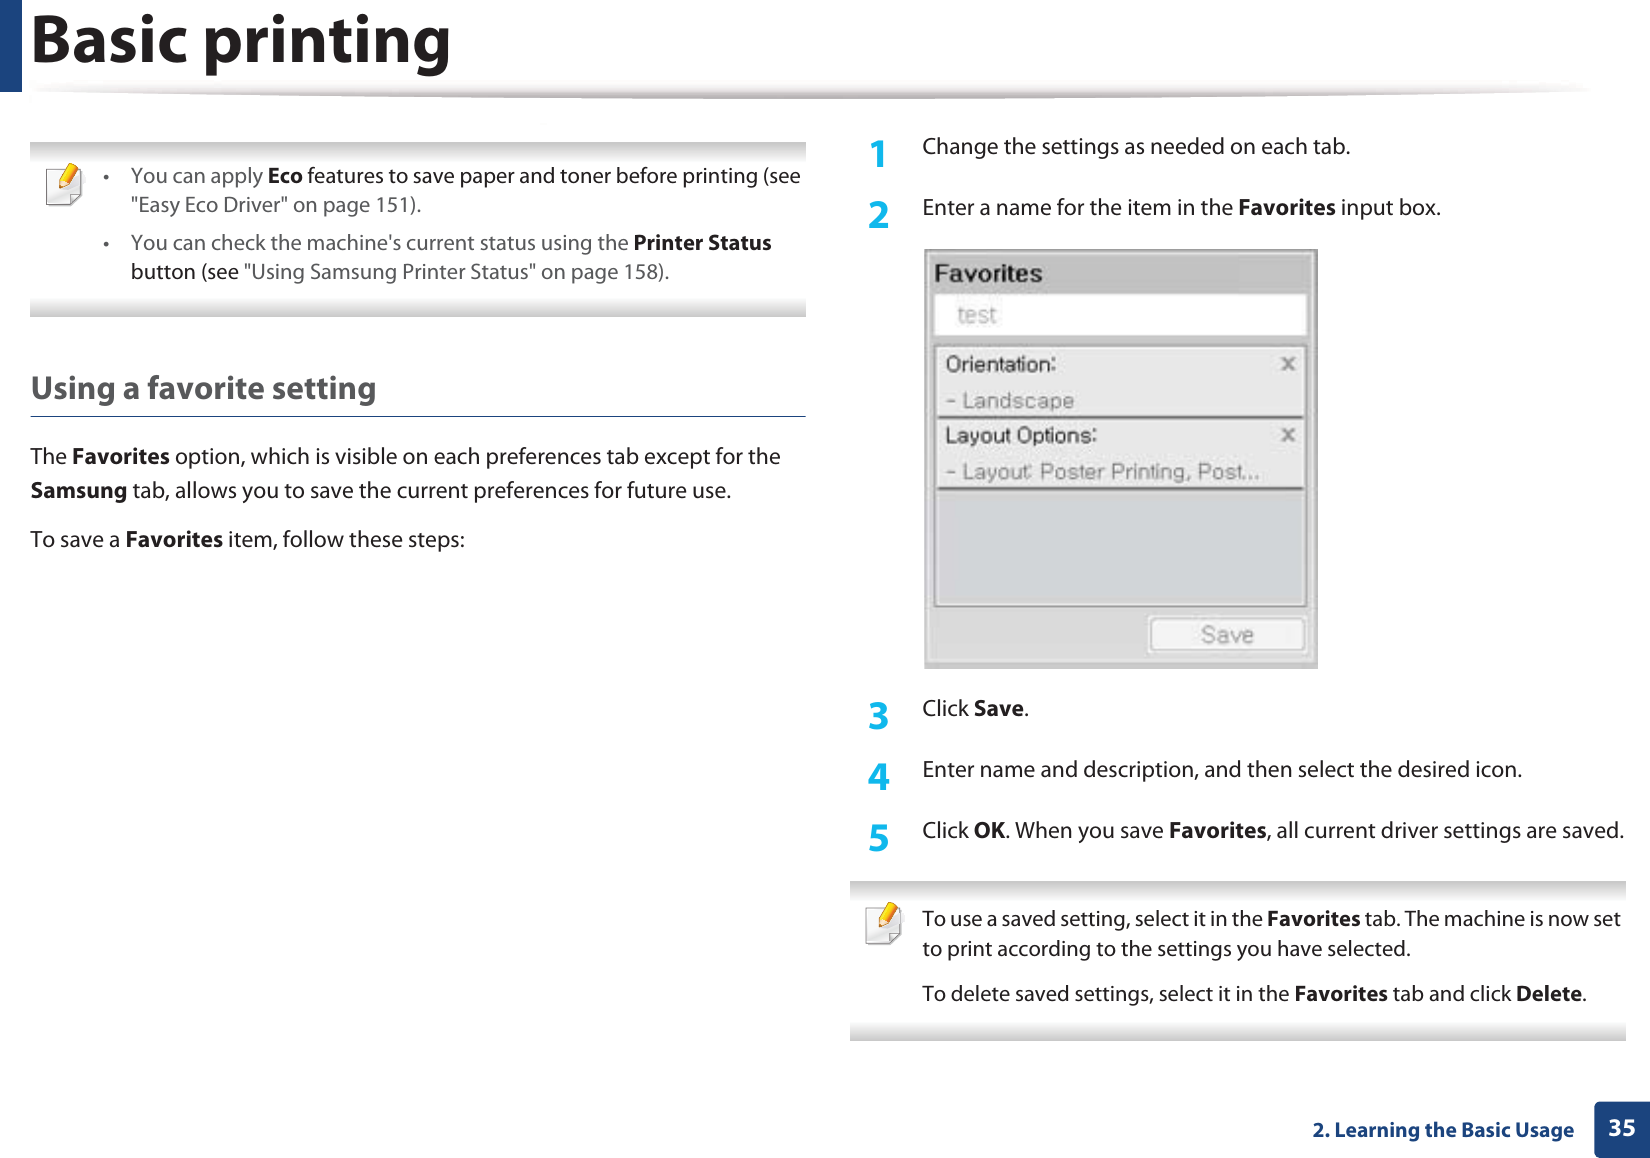 Basic printing352. Learning the Basic Usage •You can apply Eco features to save paper and toner before printing (see &quot;Easy Eco Driver&quot; on page 151).• You can check the machine&apos;s current status using the Printer Status button (see &quot;Using Samsung Printer Status&quot; on page 158). Using a favorite settingThe Favorites option, which is visible on each preferences tab except for the Samsung tab, allows you to save the current preferences for future use.To save a Favorites item, follow these steps:1Change the settings as needed on each tab. 2  Enter a name for the item in the Favorites input box.3  Click Save. 4  Enter name and description, and then select the desired icon.5  Click OK. When you save Favorites, all current driver settings are saved. To use a saved setting, select it in the Favorites tab. The machine is now set to print according to the settings you have selected.To delete saved settings, select it in the Favorites tab and click Delete.  